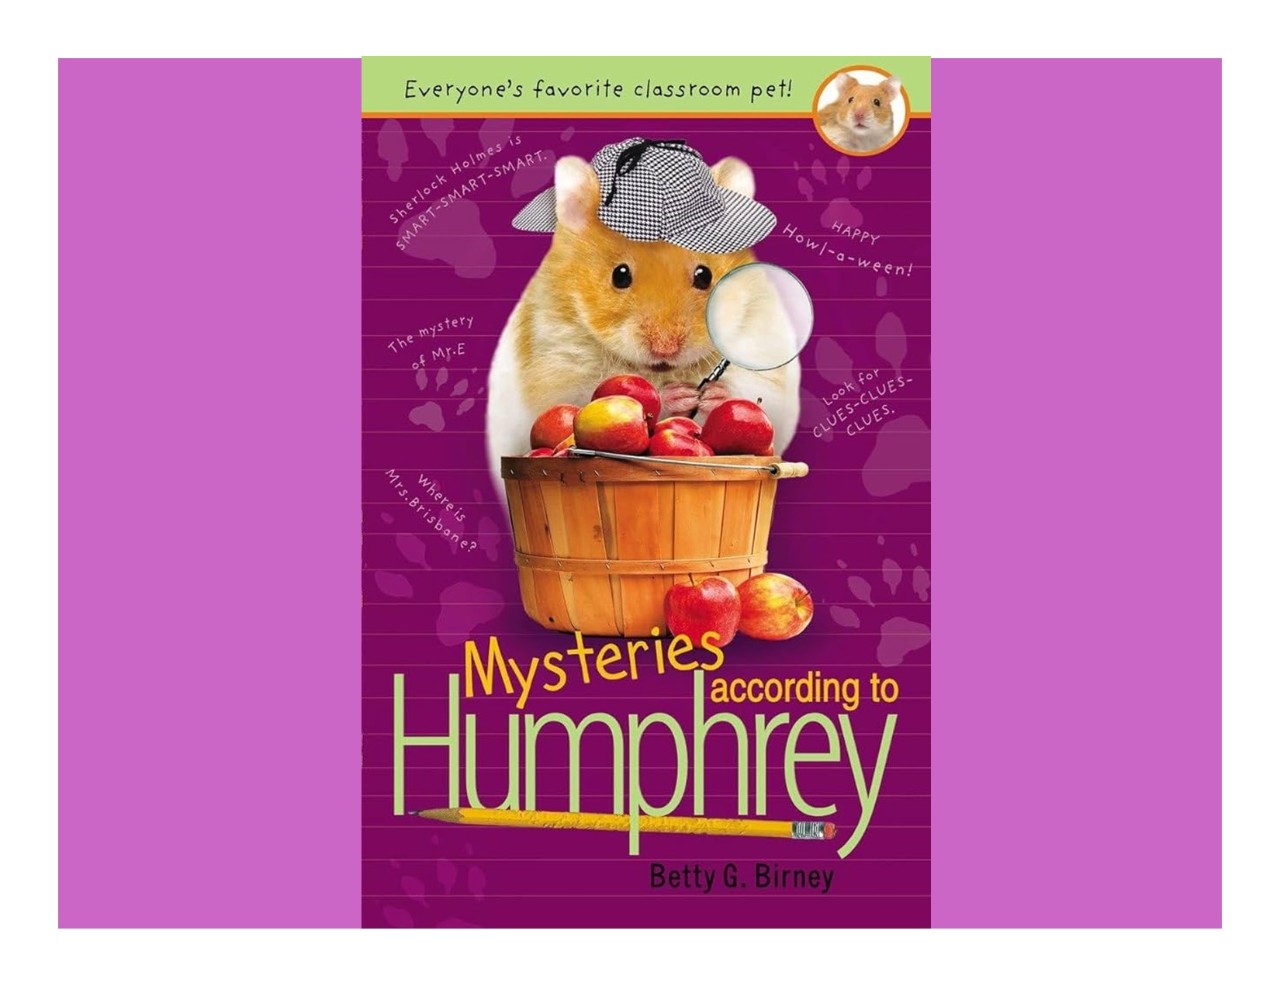 Mysteries according to Humphrey book cover